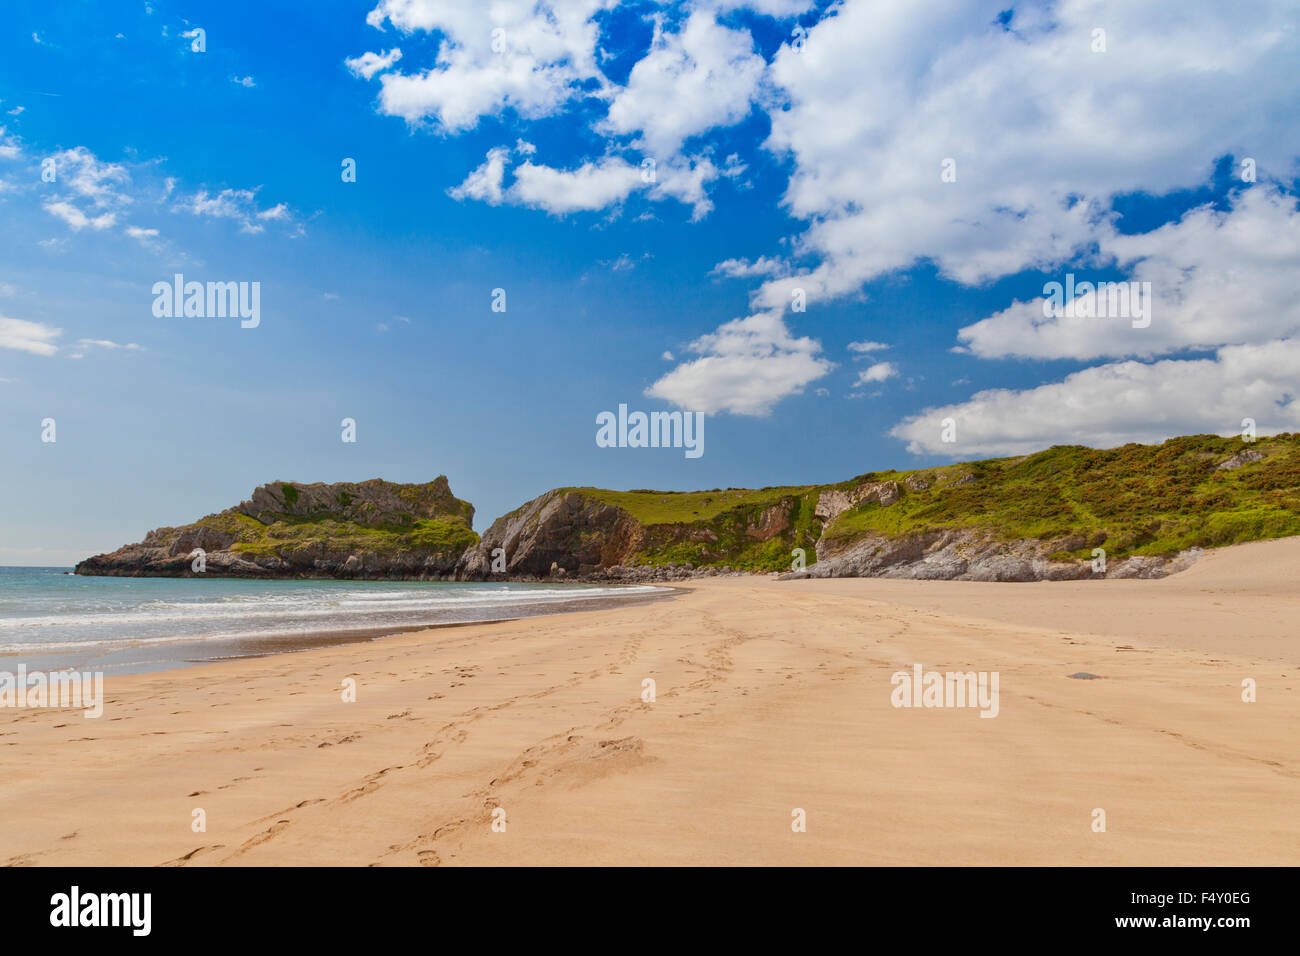 The deserted beach at Broadhaven South, Pembrokeshire, Wales, UK Stock Photo